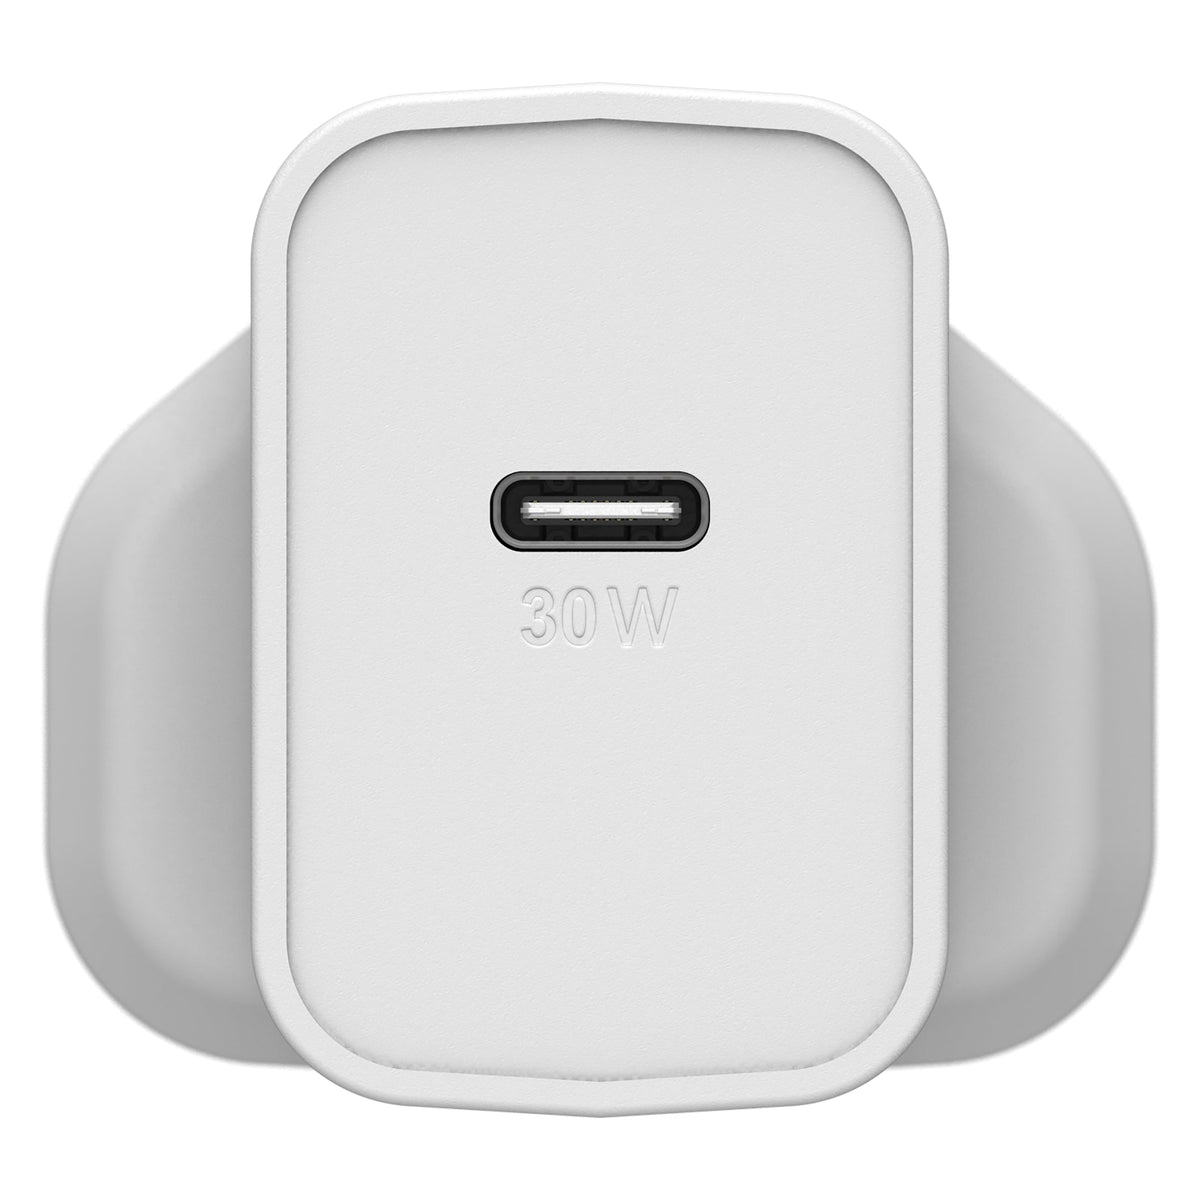 [OPEN BOX] OTTERBOX UK Wall Charger 30W Rugged Fast Compact Charger for USB-C Devices - White